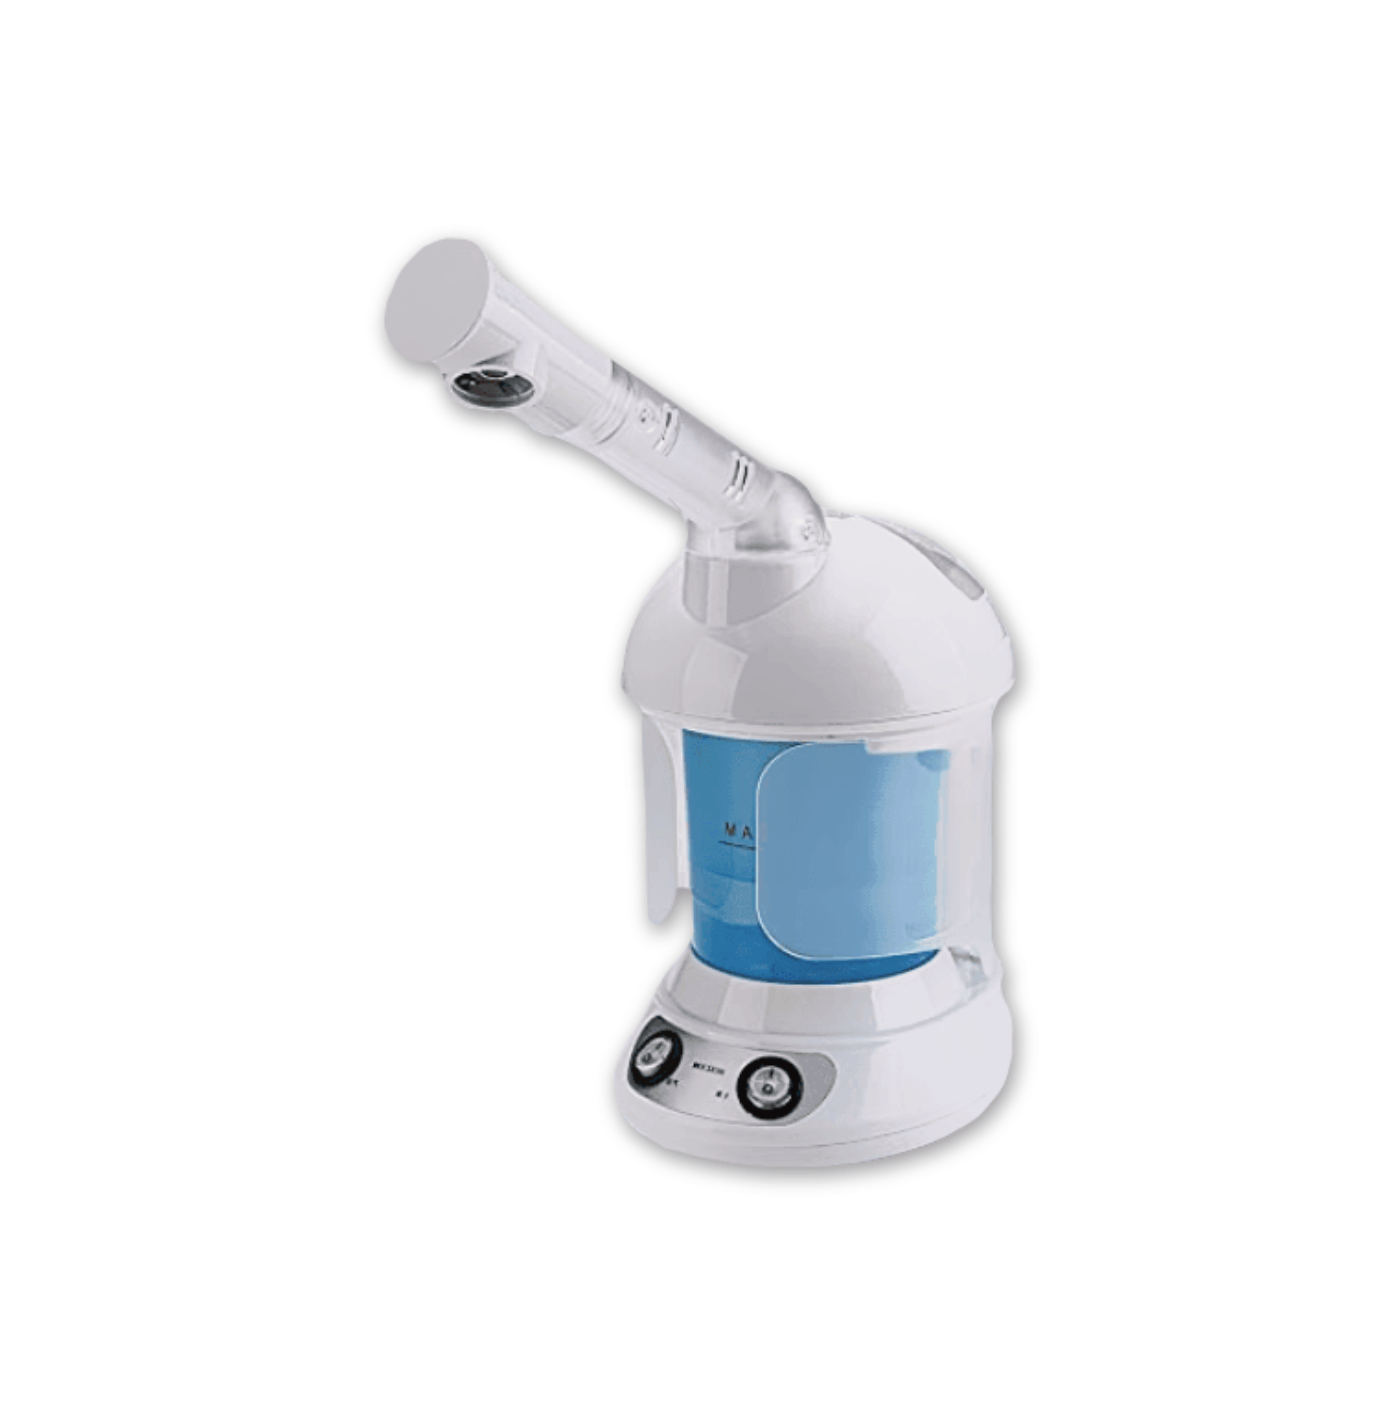 2-in-1 Vapour Ozone Steamer